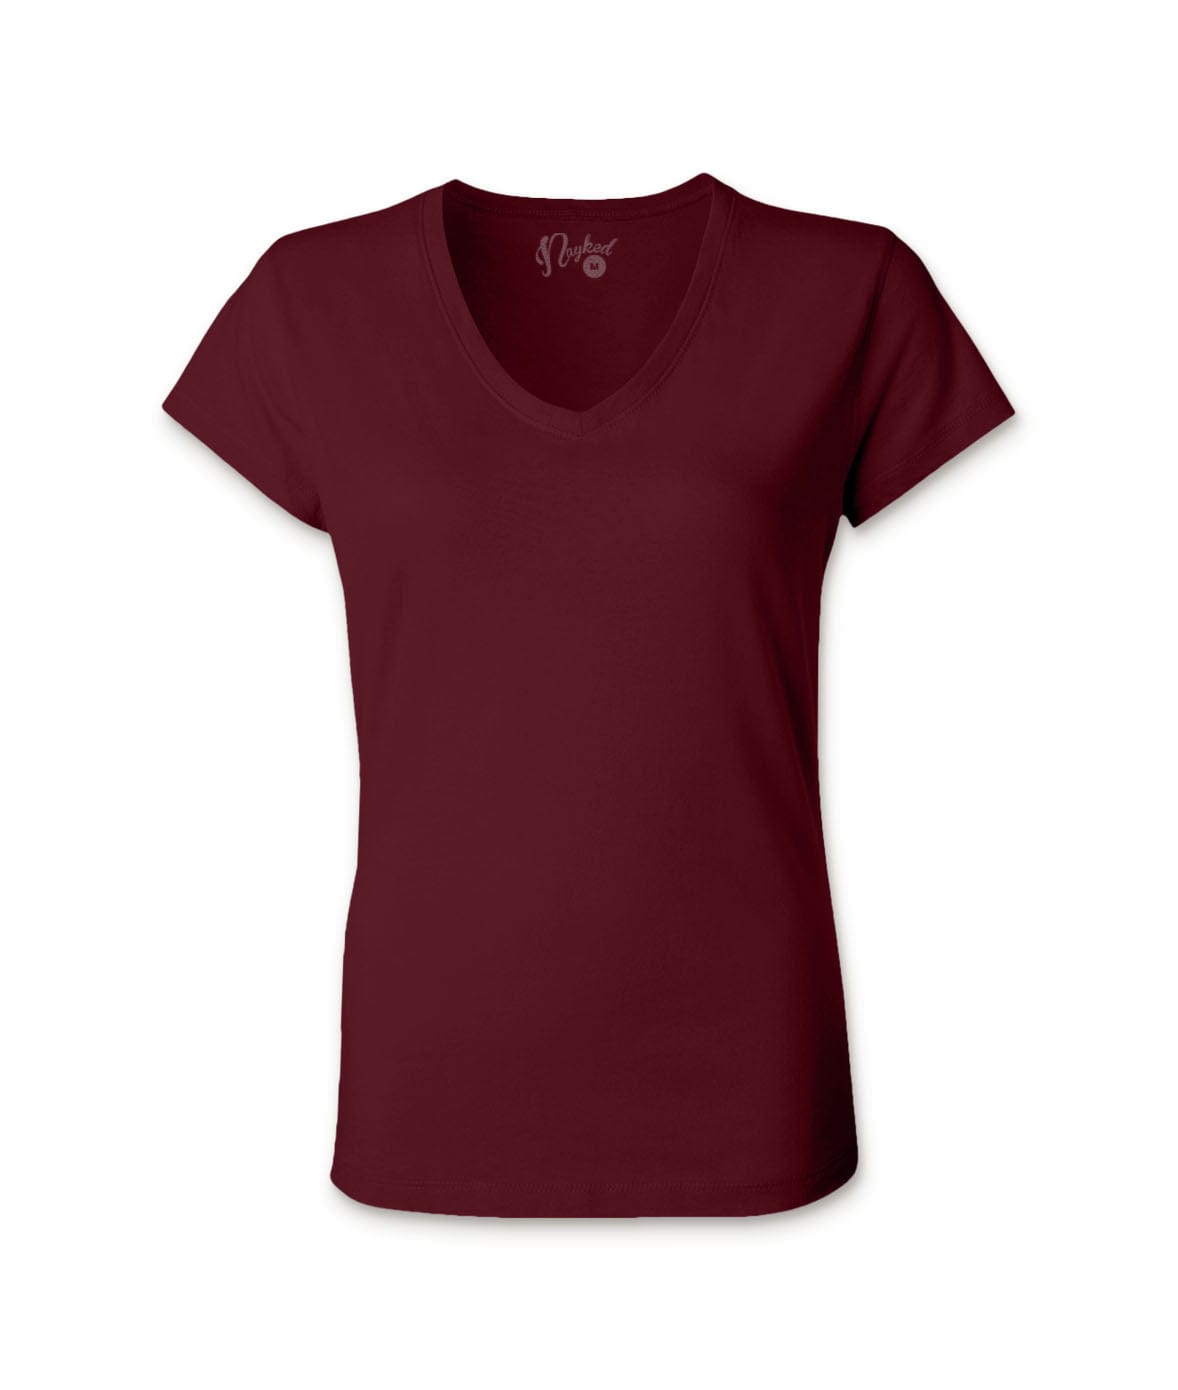 Women's Ridiculously Soft 100% Cotton Fitted V-Neck T-shirt